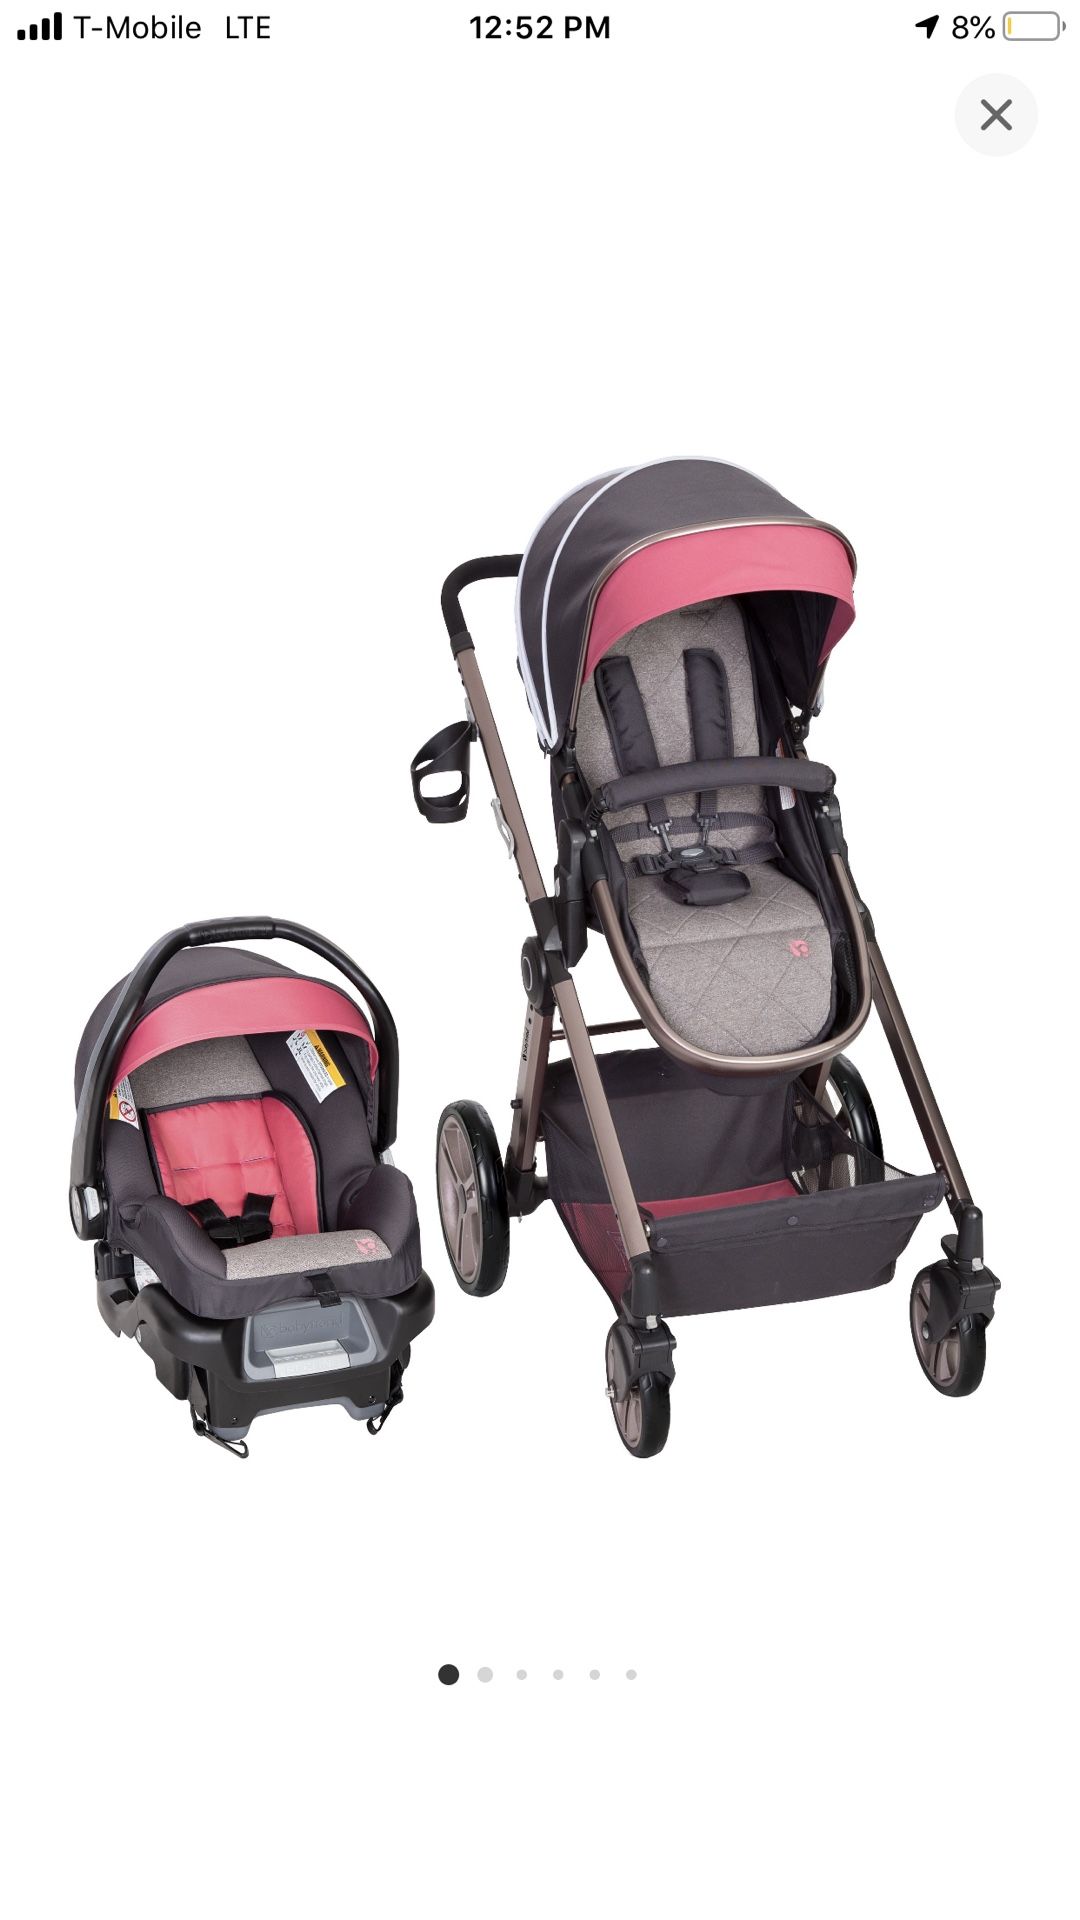 Baby trend travel system ( stroller/car seat combo)